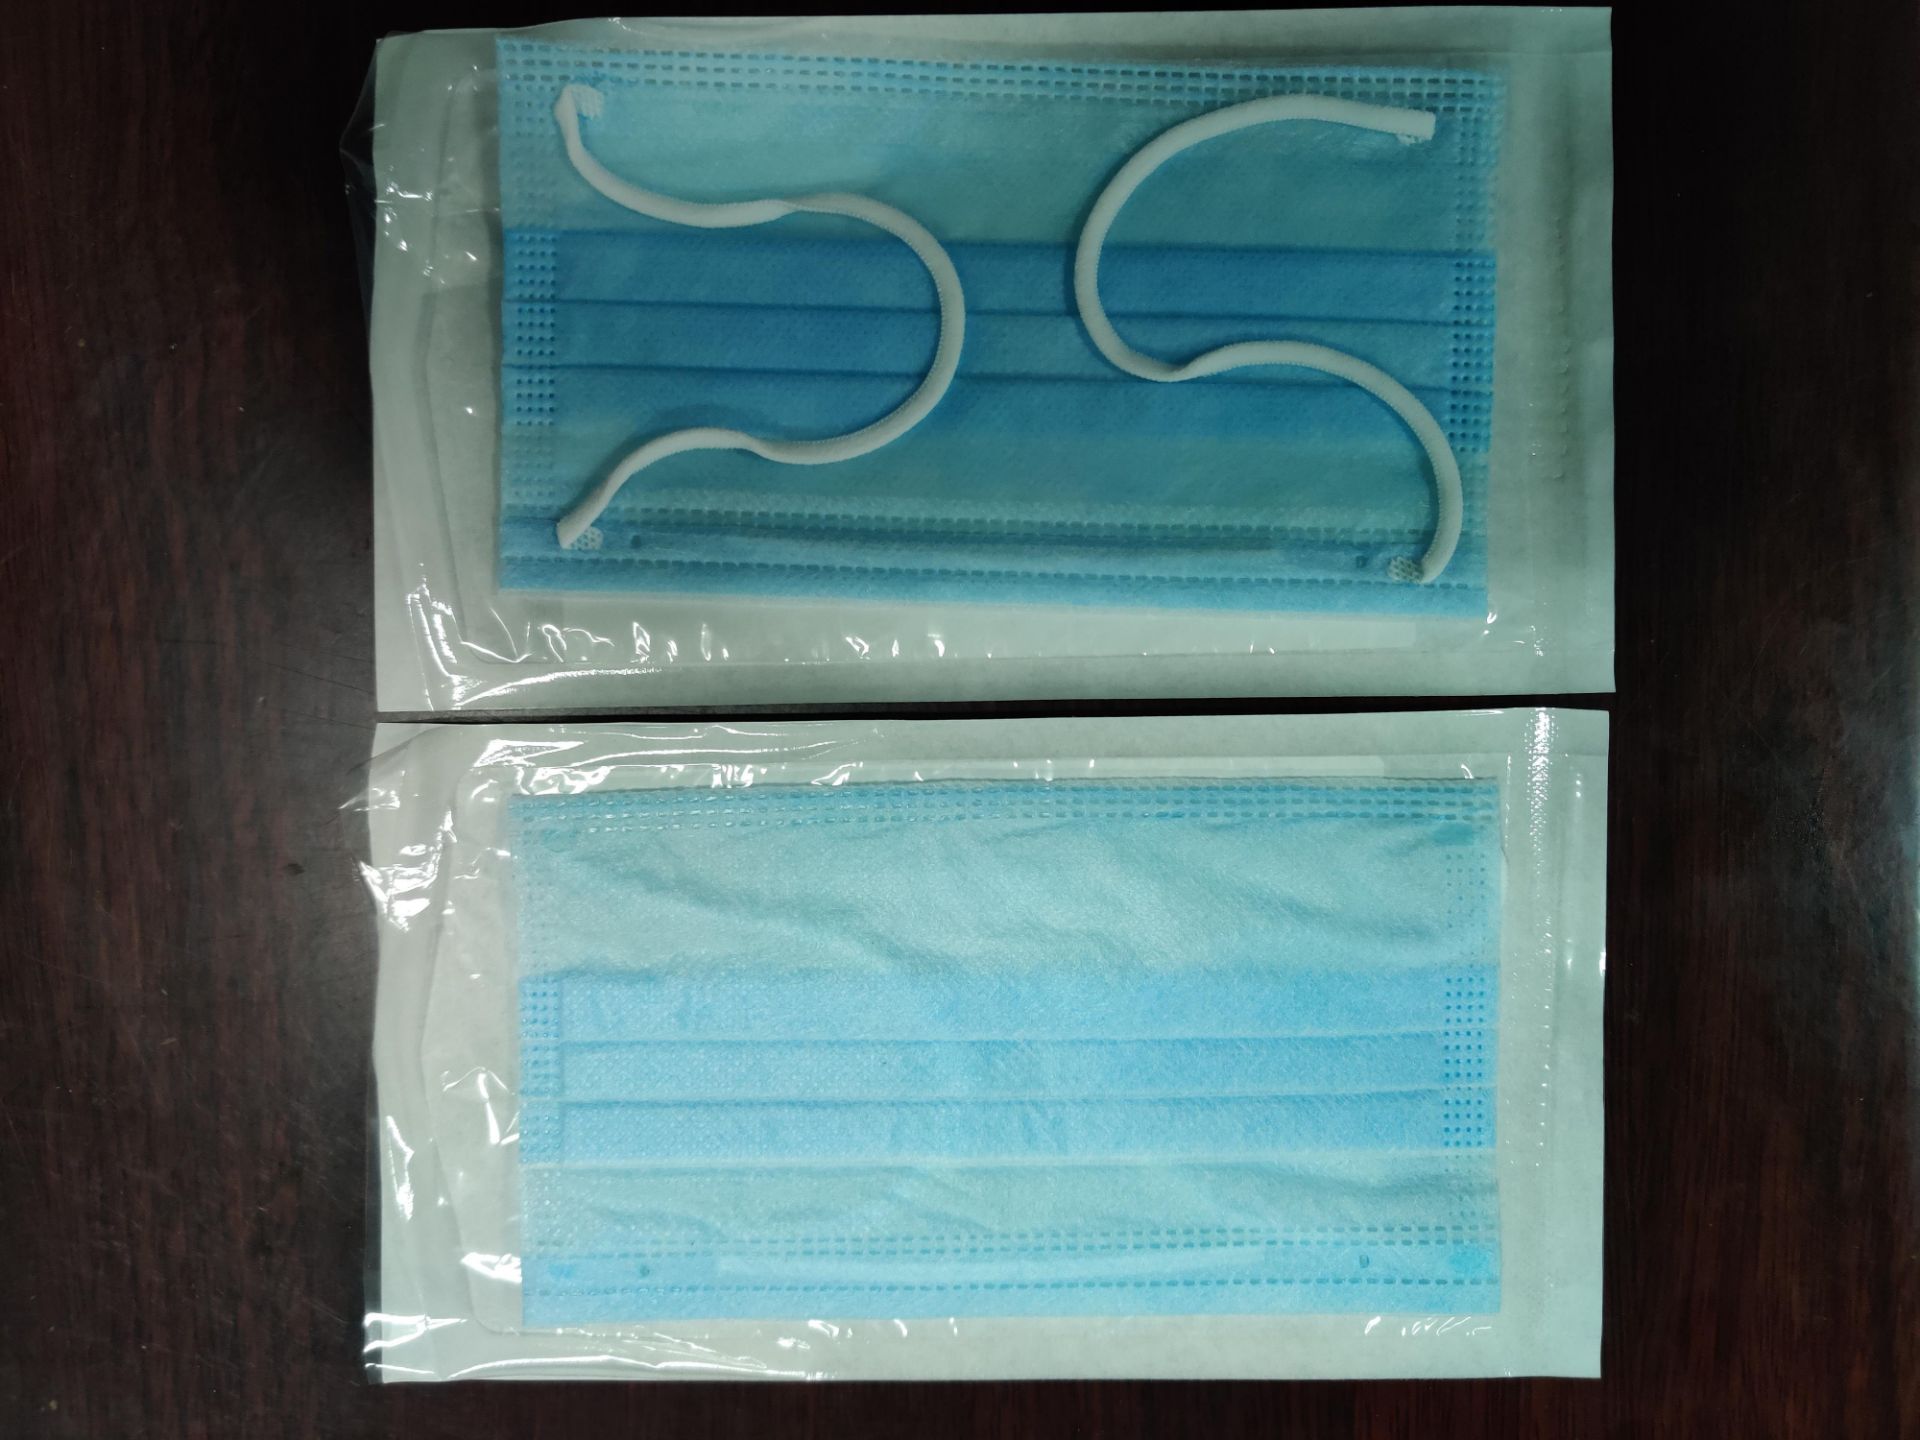 Type IIR Triple Layer Surgical Face Masks (2000pcs) UK delivery included - Image 6 of 8